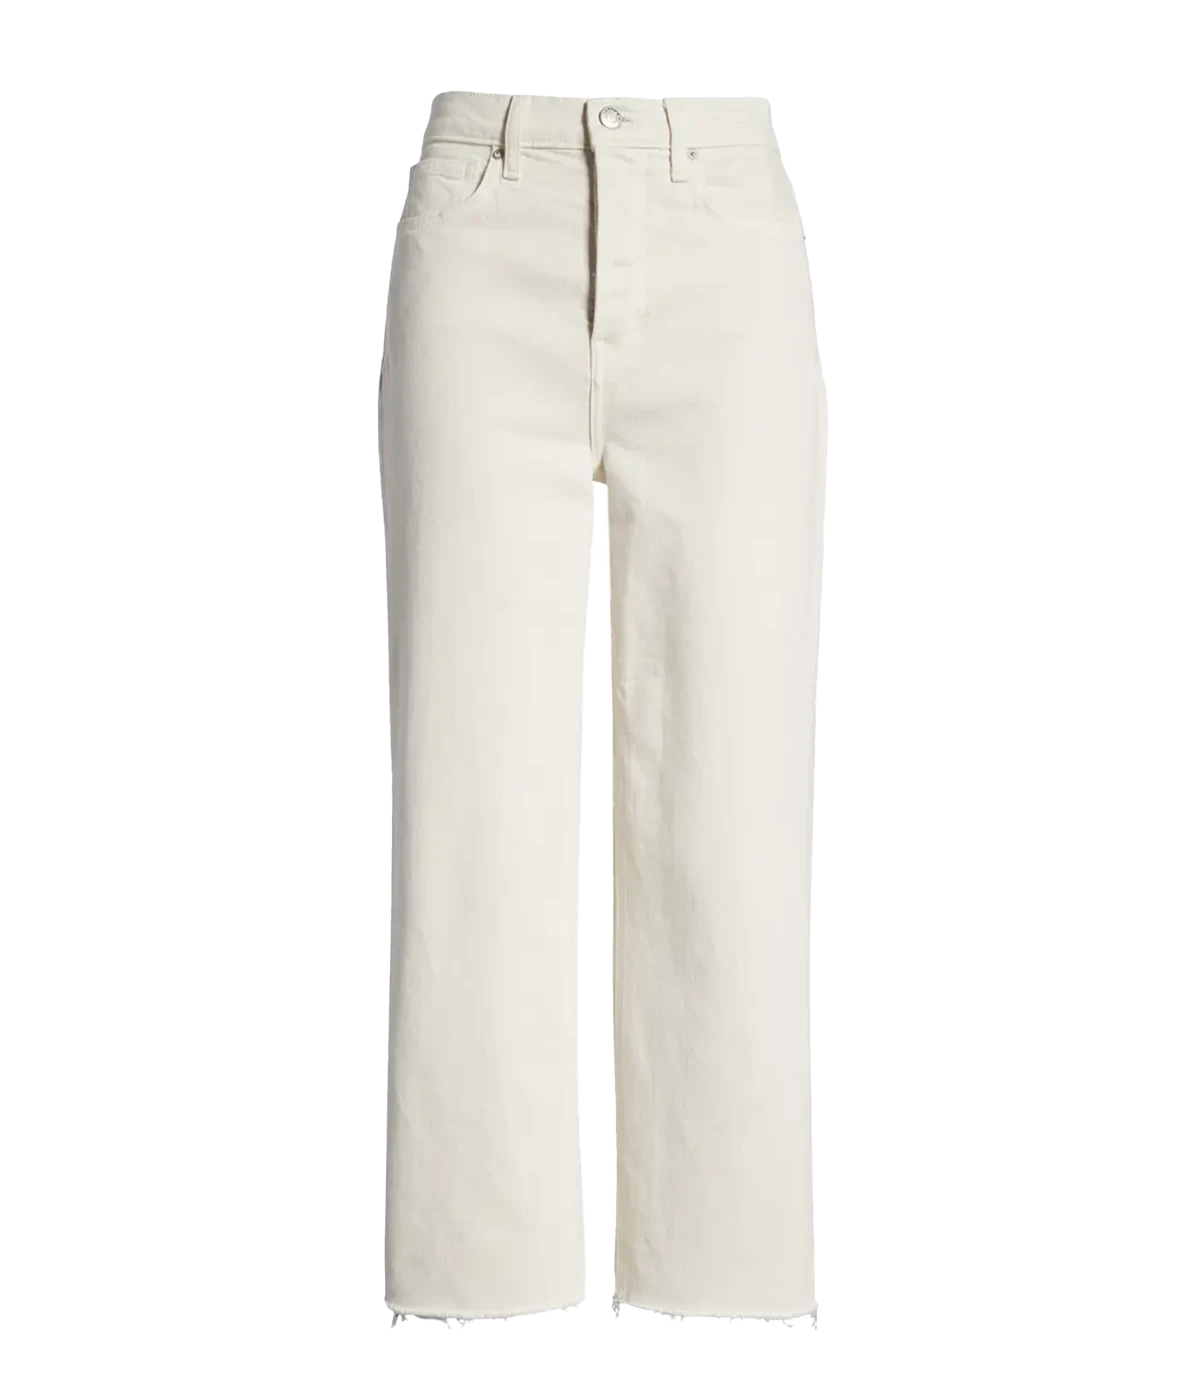 Image of an off white high rise straight leg jean, with a cropped hem, distressed ankle and vintage relaxed cut. Featuring a fly and button fastening and belt loop holes. 